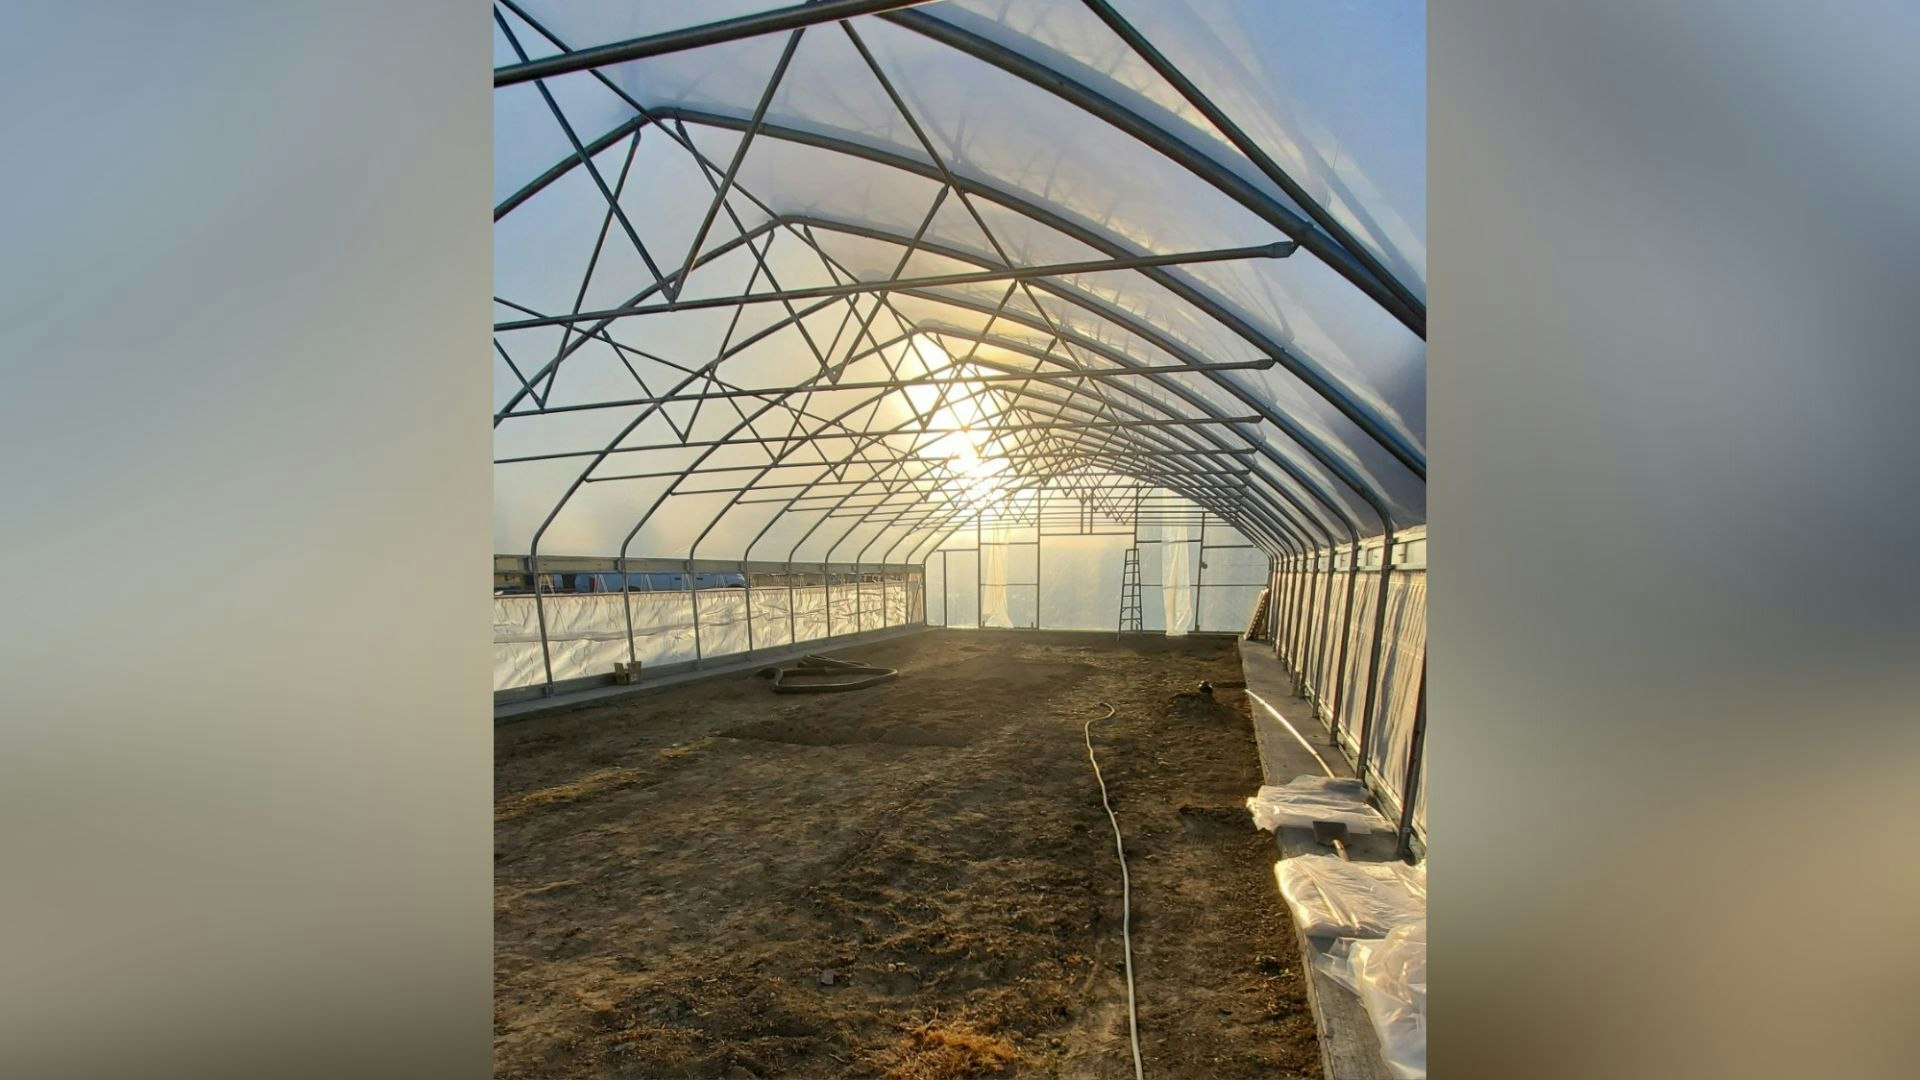 This large 30-by-70-foot greenhouse will house just two pumpkins — but they'll be huge. Owner Jay Richard hopes too grow a 2,000-pound pumpkin in it.